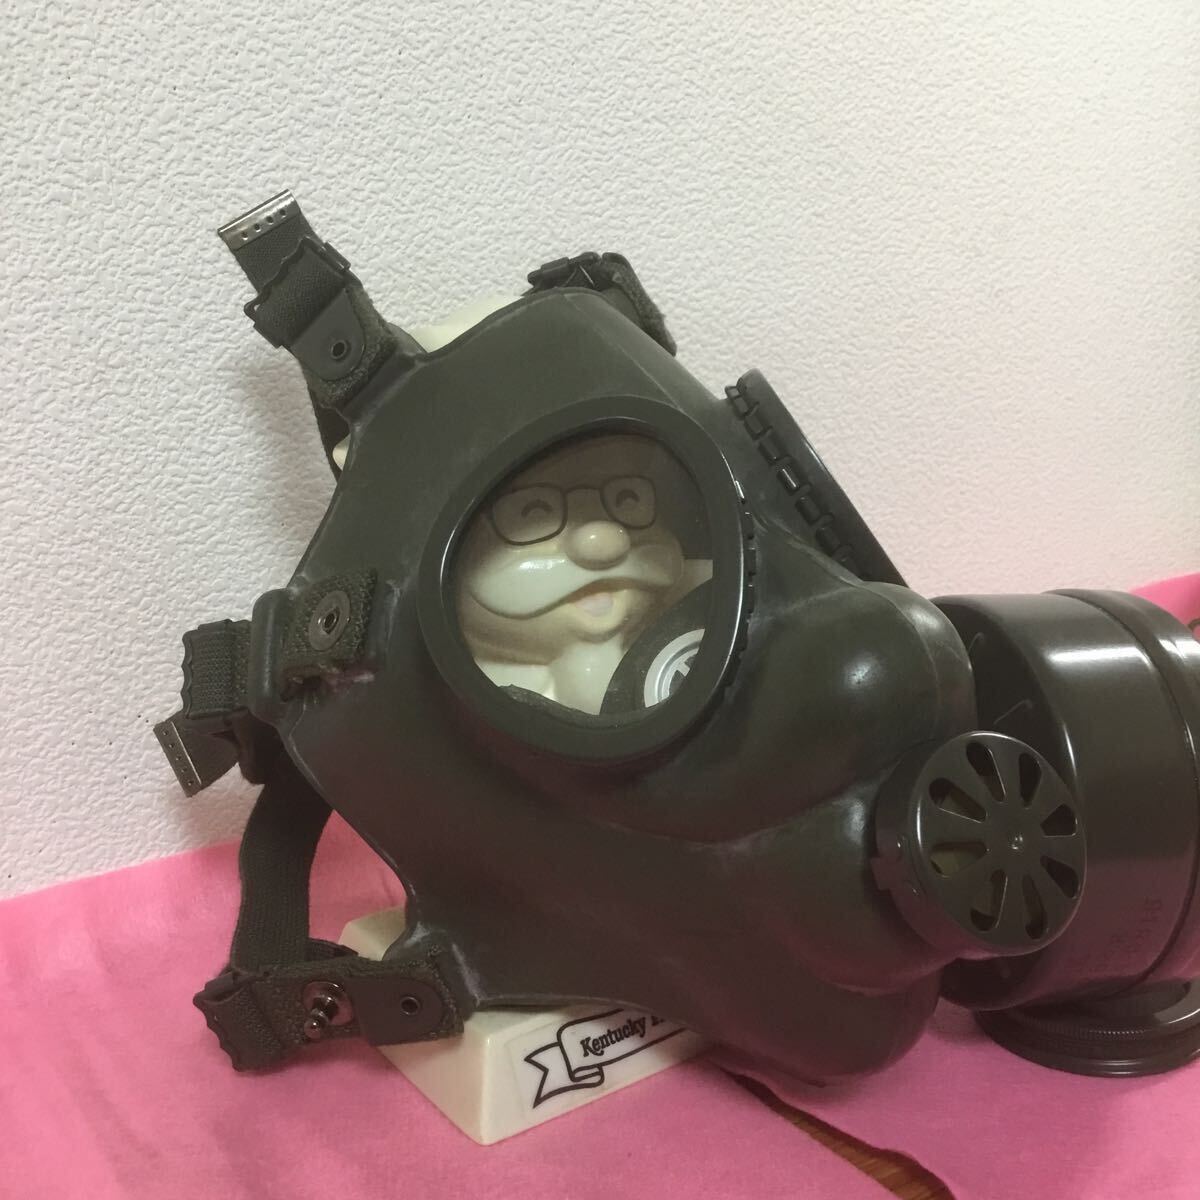 Z-641 self .. protection mask 2 type gas mask canister attaching the truth thing SKK Showa Retro Vintage size is image . reference .* present condition pick up 